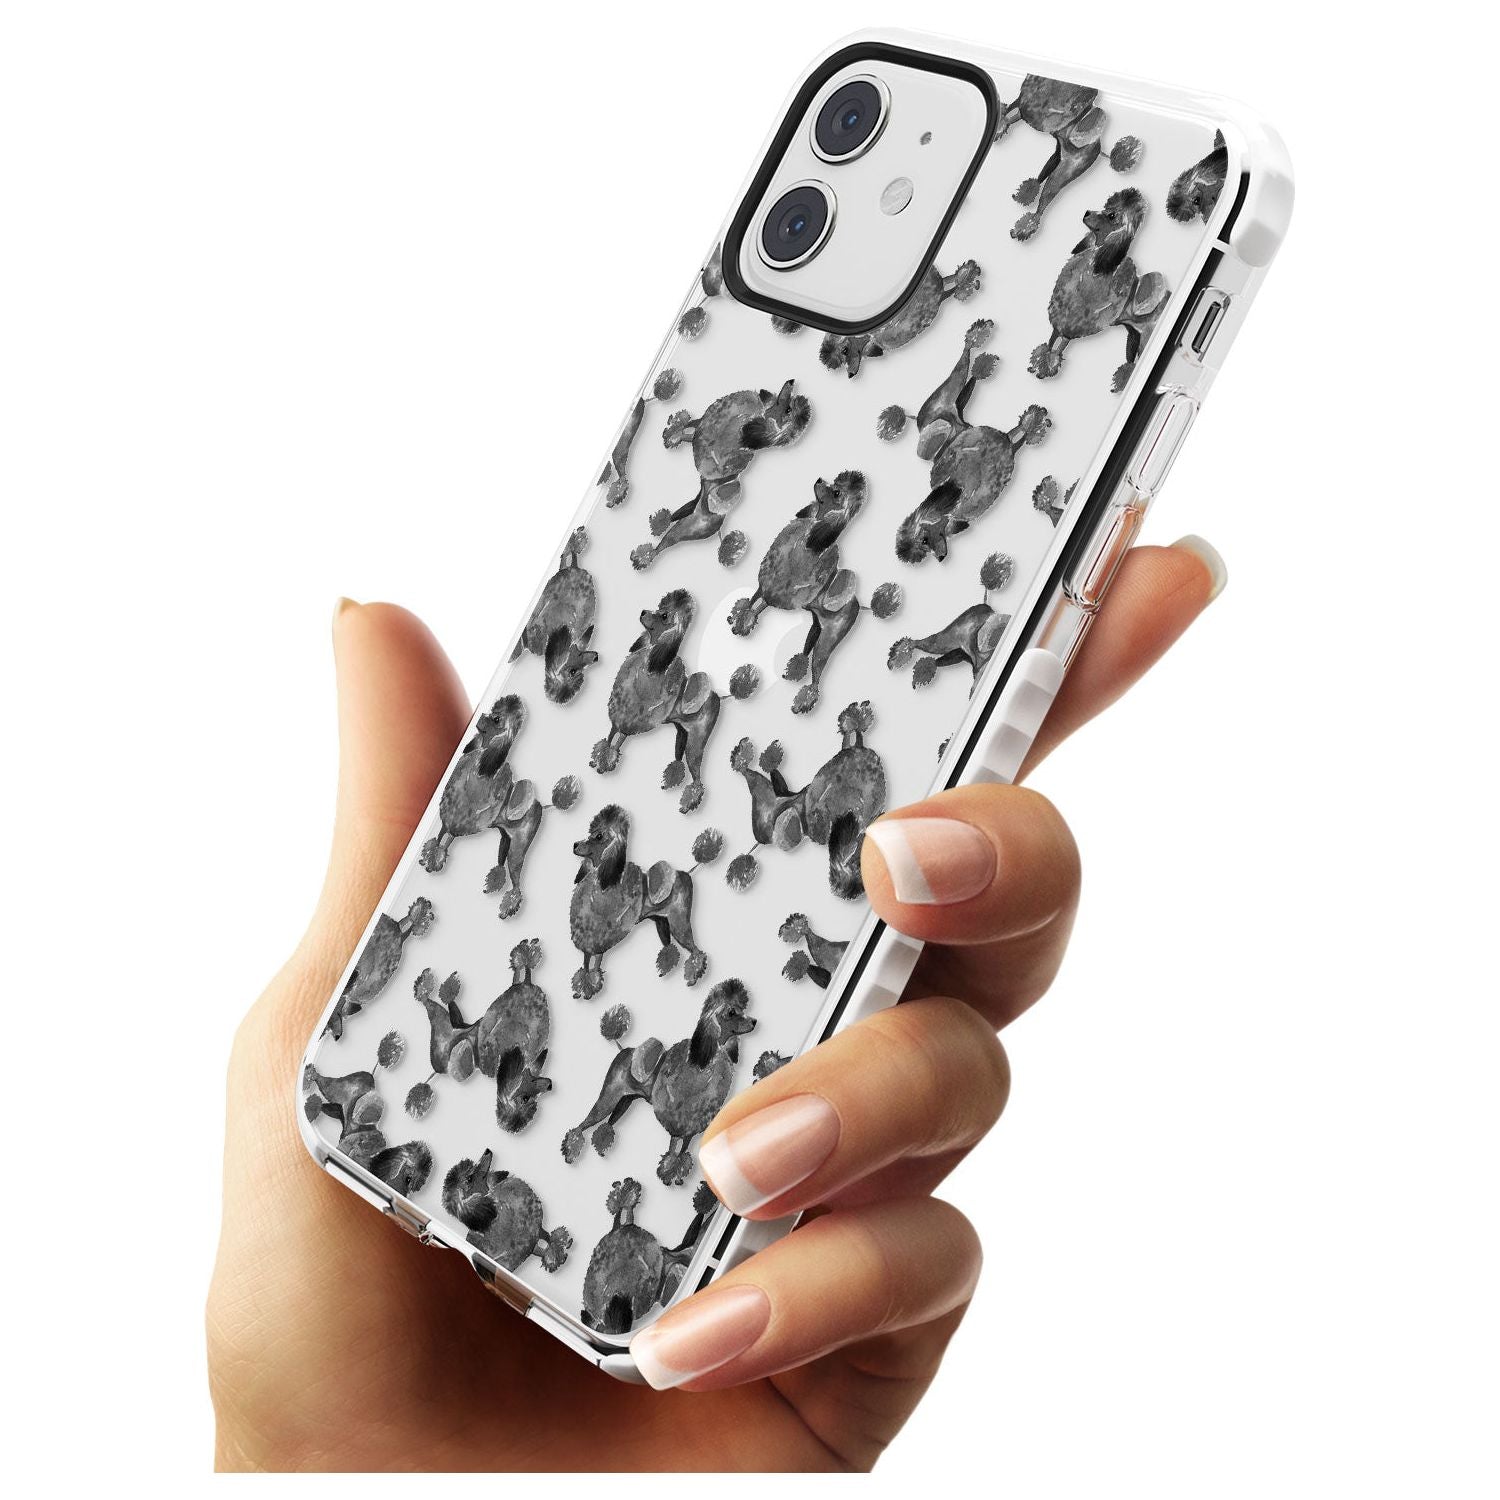 Poodle (Black) Watercolour Dog Pattern Impact Phone Case for iPhone 11